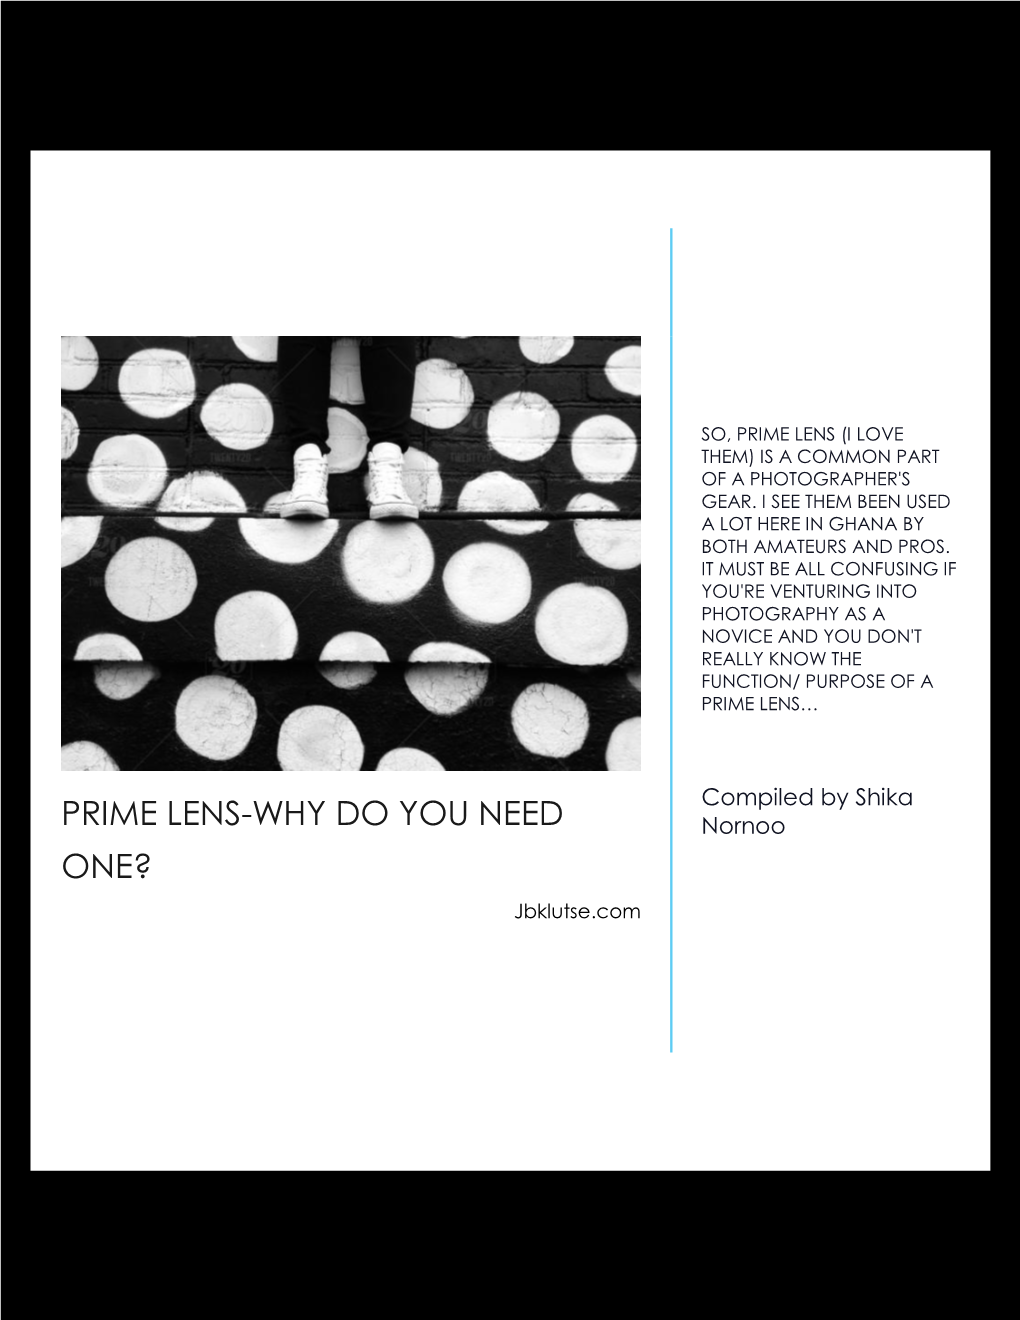 Prime Lens-Why Do You Need One?